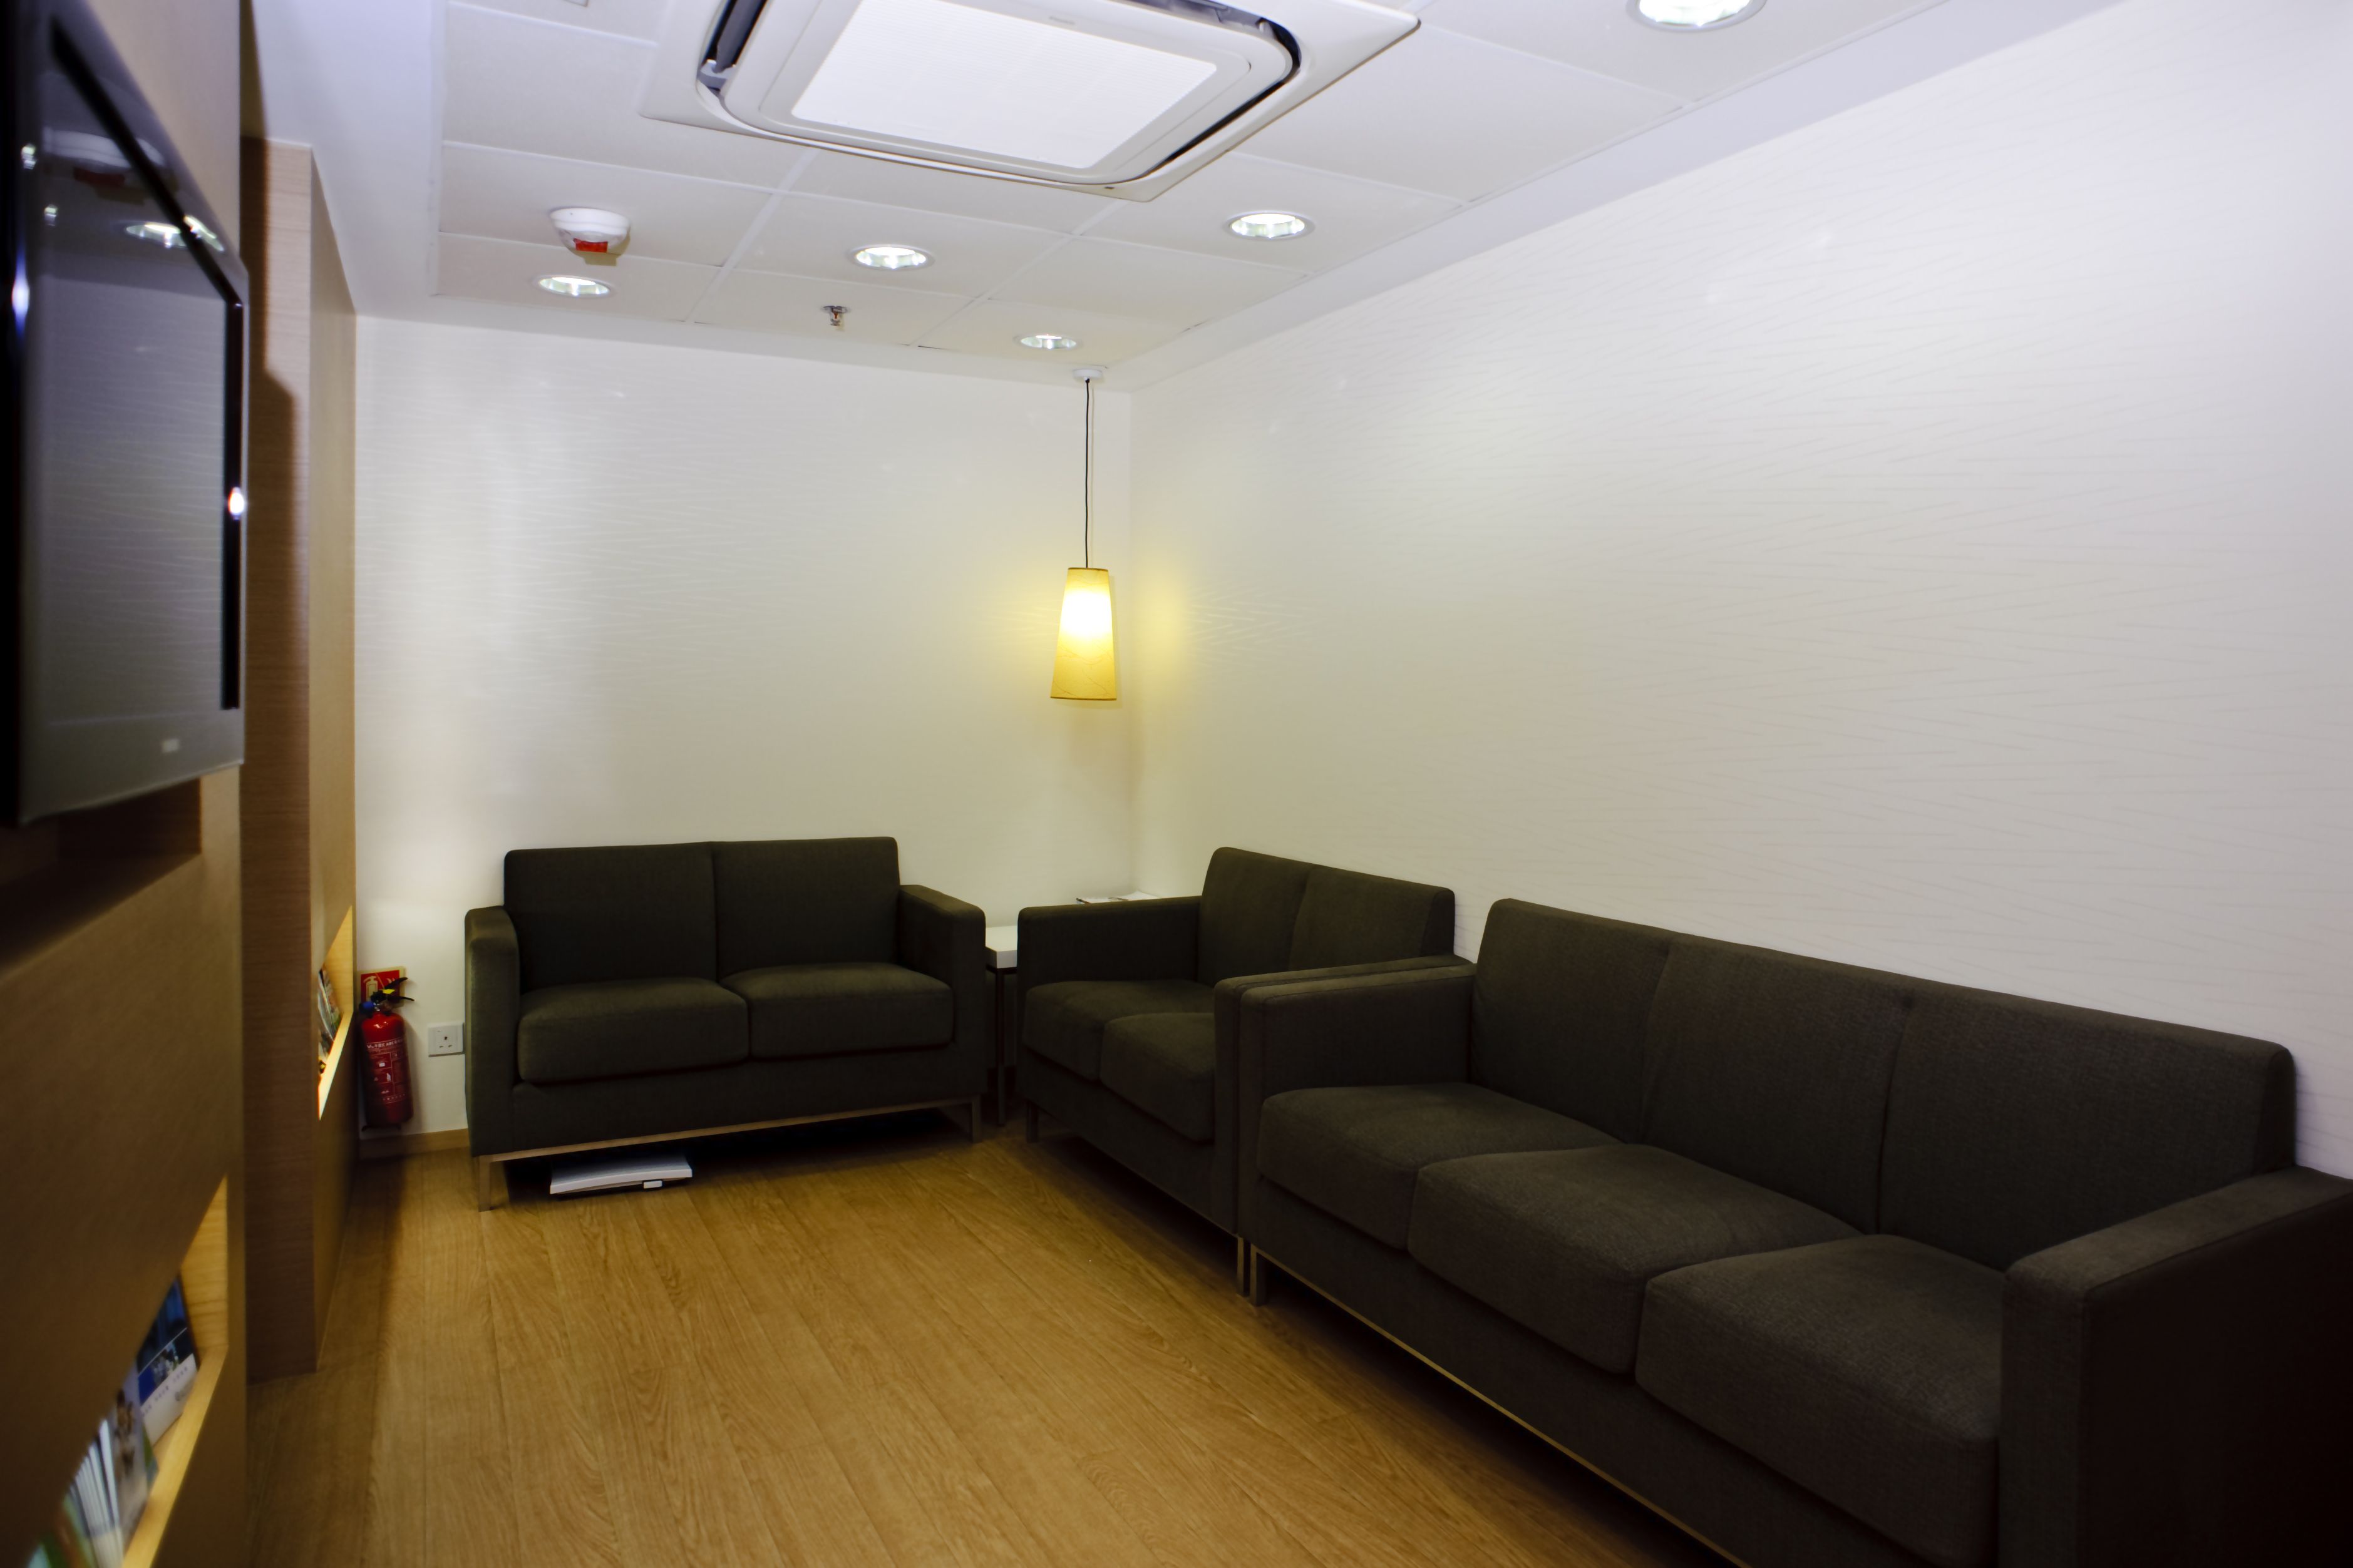 Medical centre waiting room with sofas and flat-screen TV